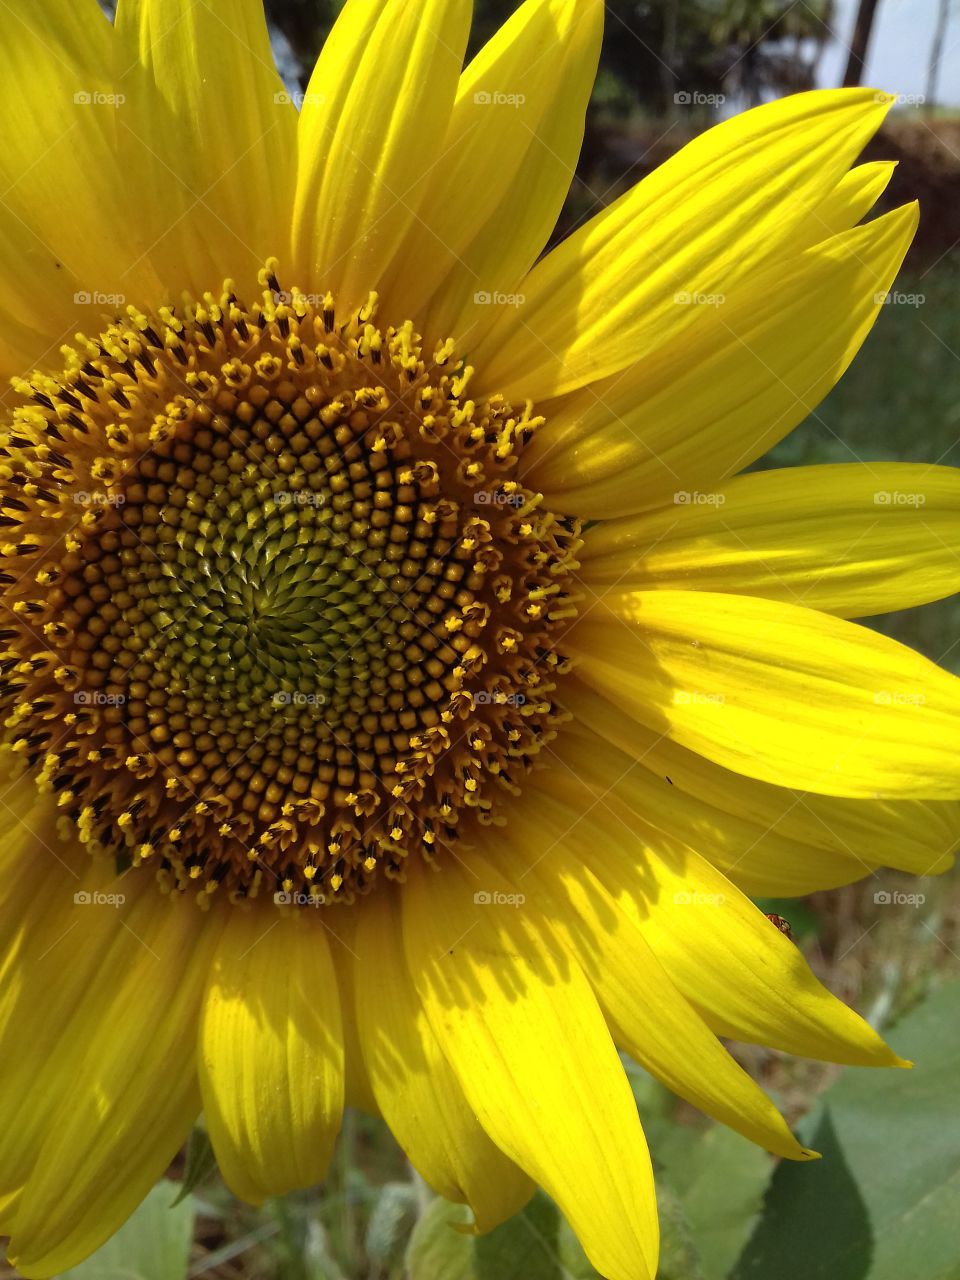 Extreme close-up of a yellow sunflower